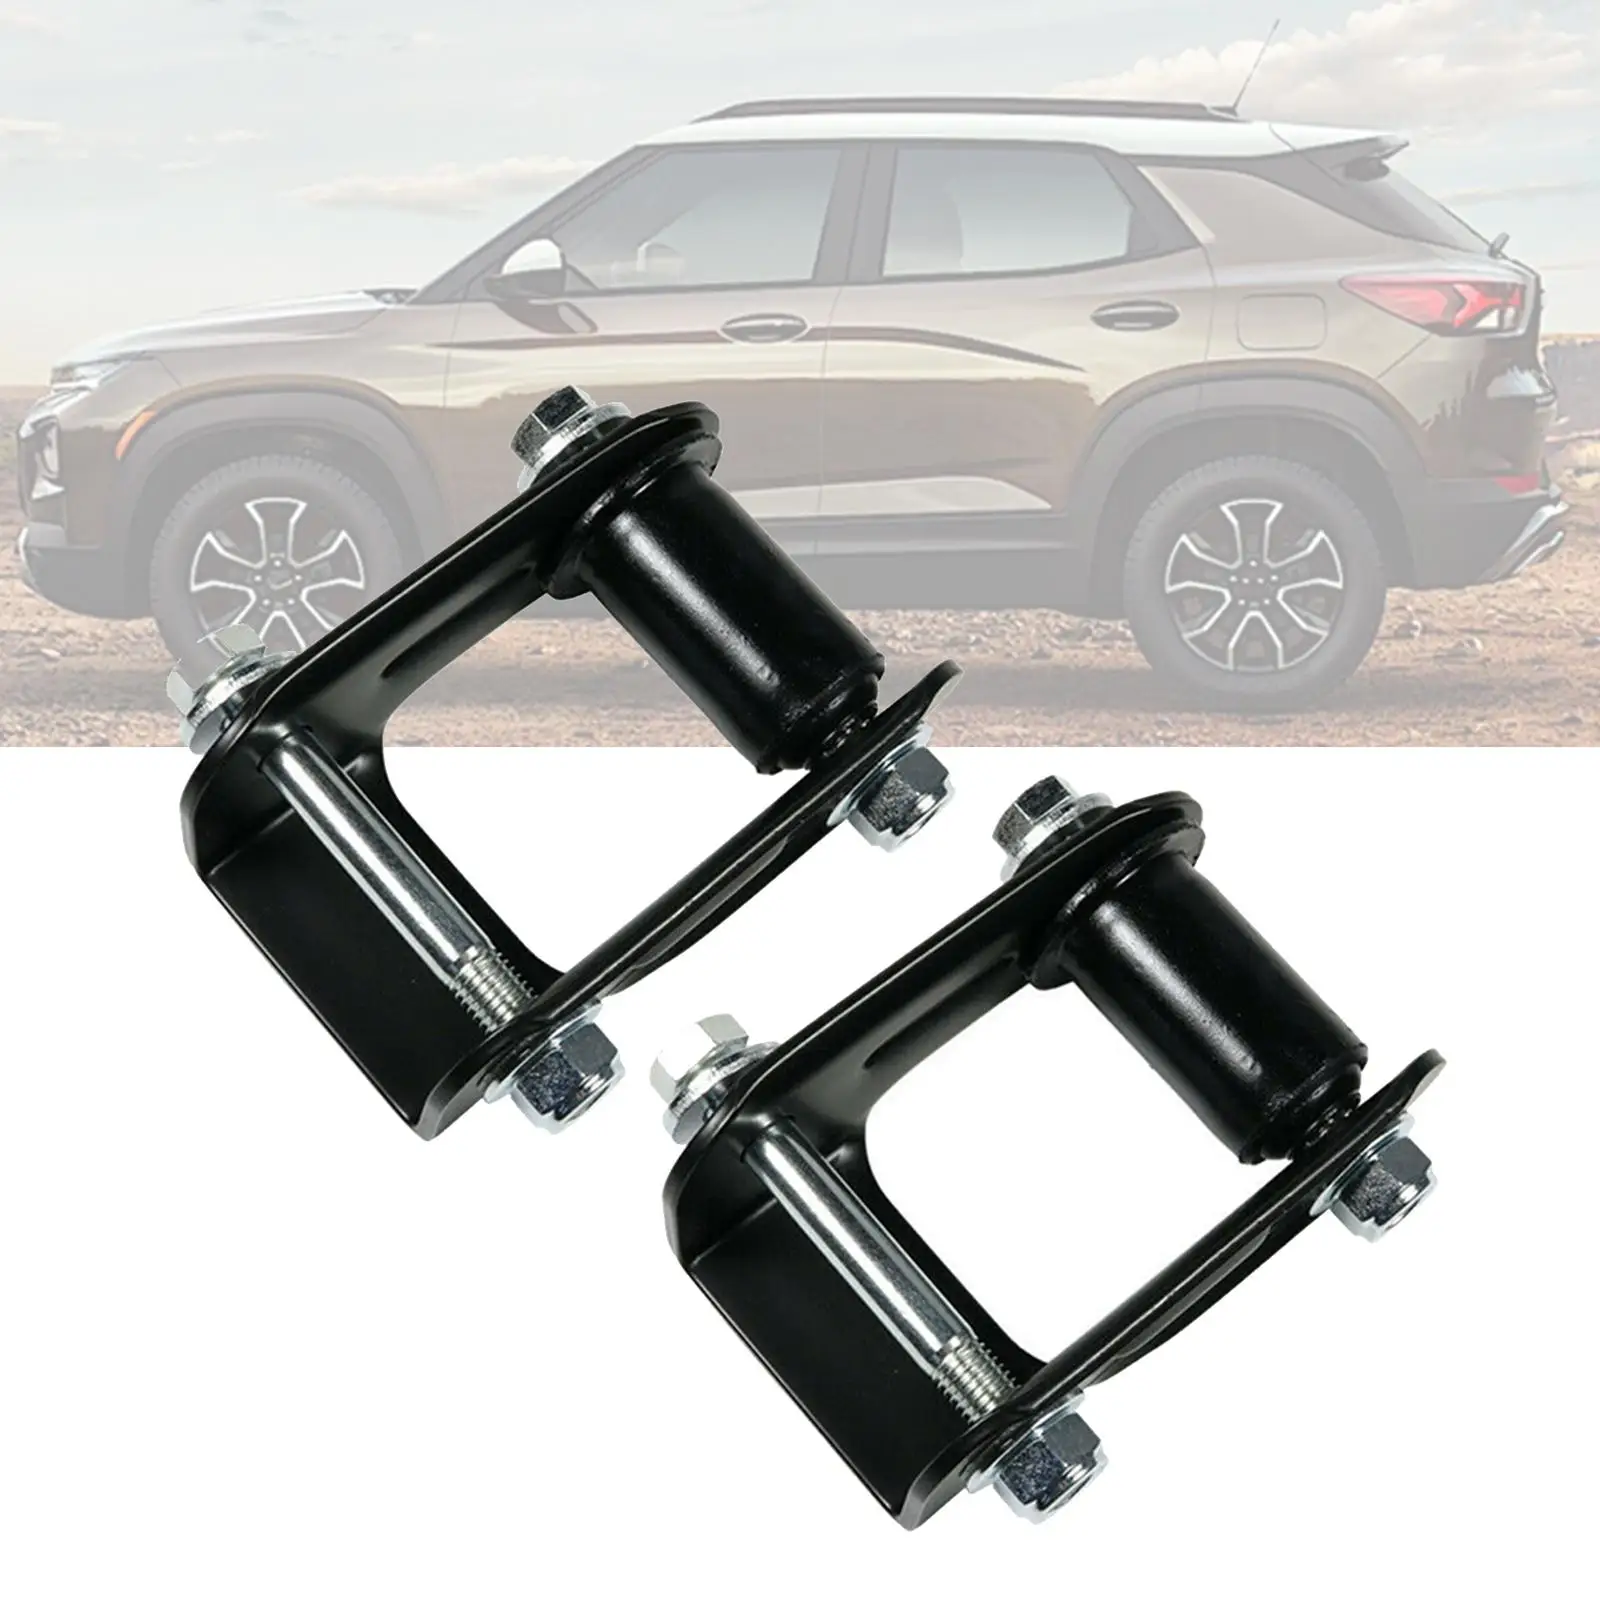 2Pcs Rear Leaf Spring Shackle Kit Professional Water Resistant 15665302 Replaces for Chevrolet S10 Blazer Blazer S10 Pickup